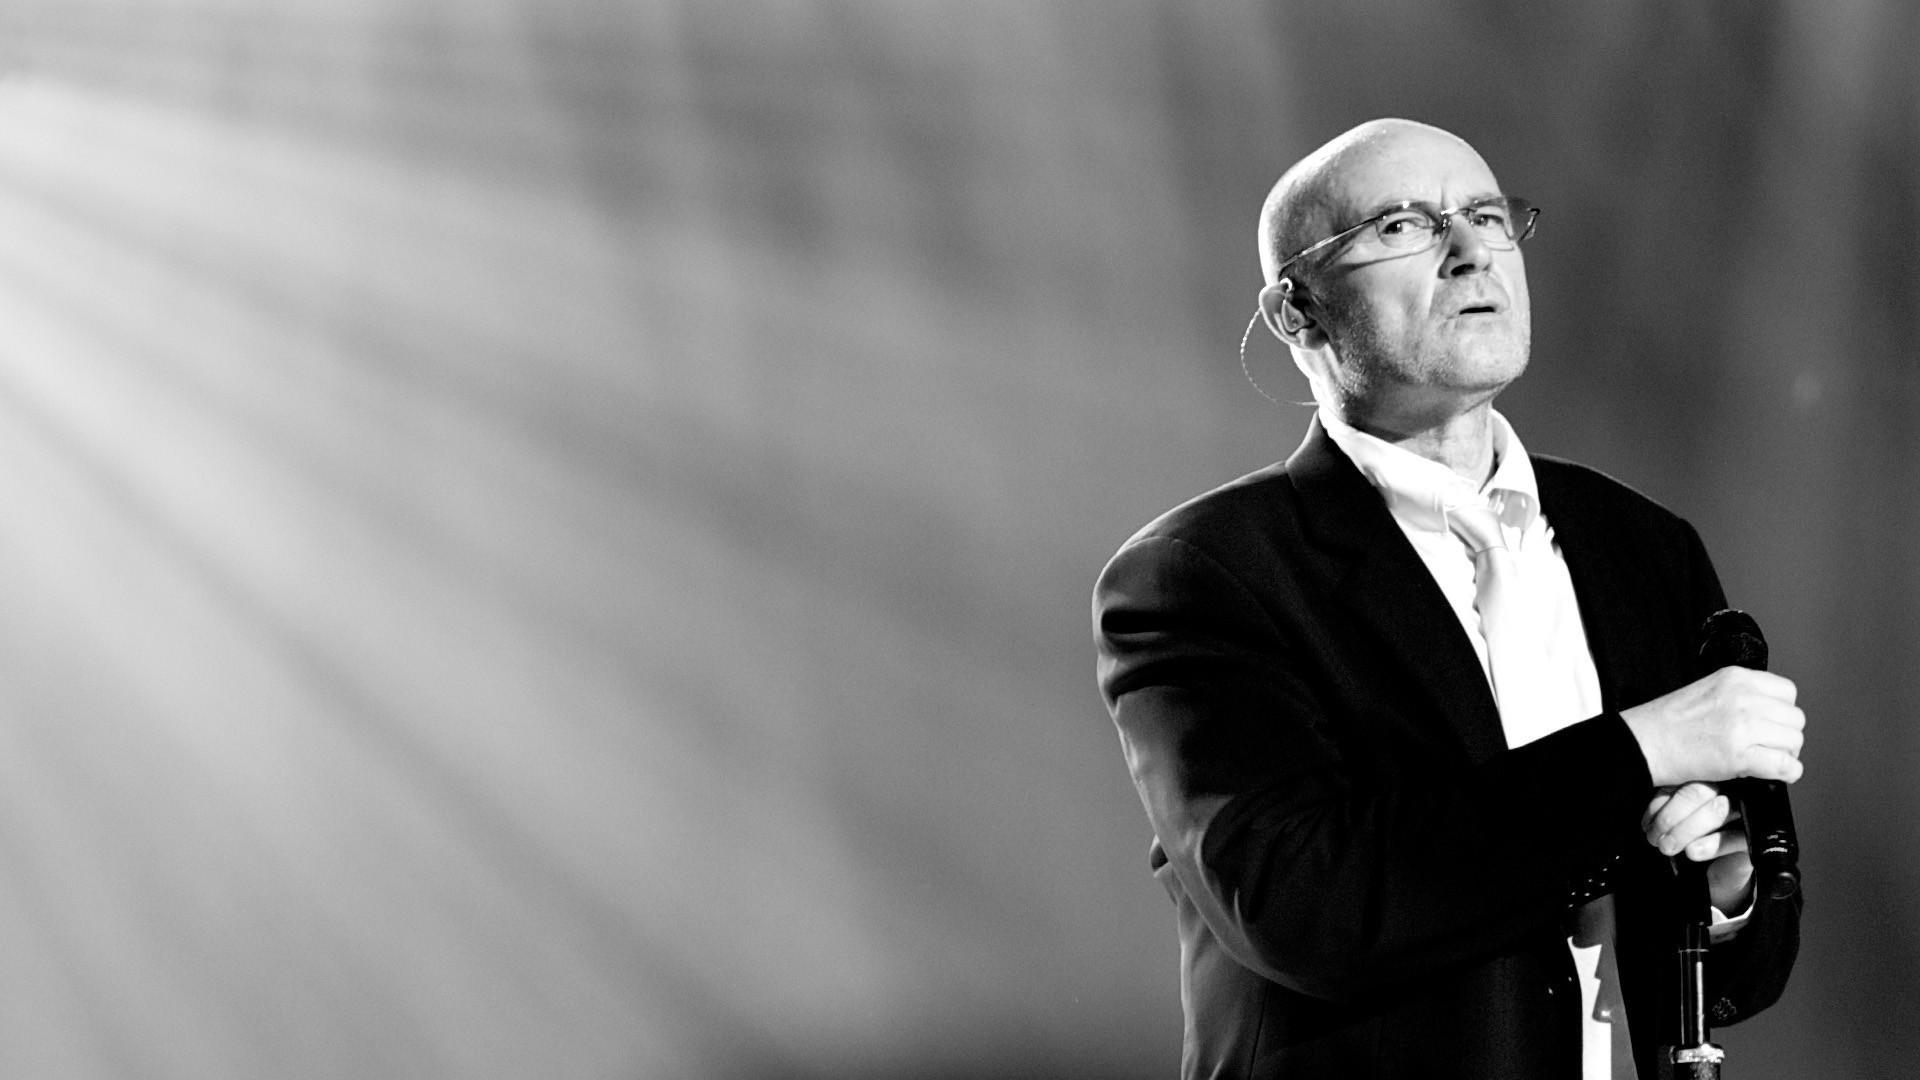 Phil Collins Wallpaper Image Photo Picture Background